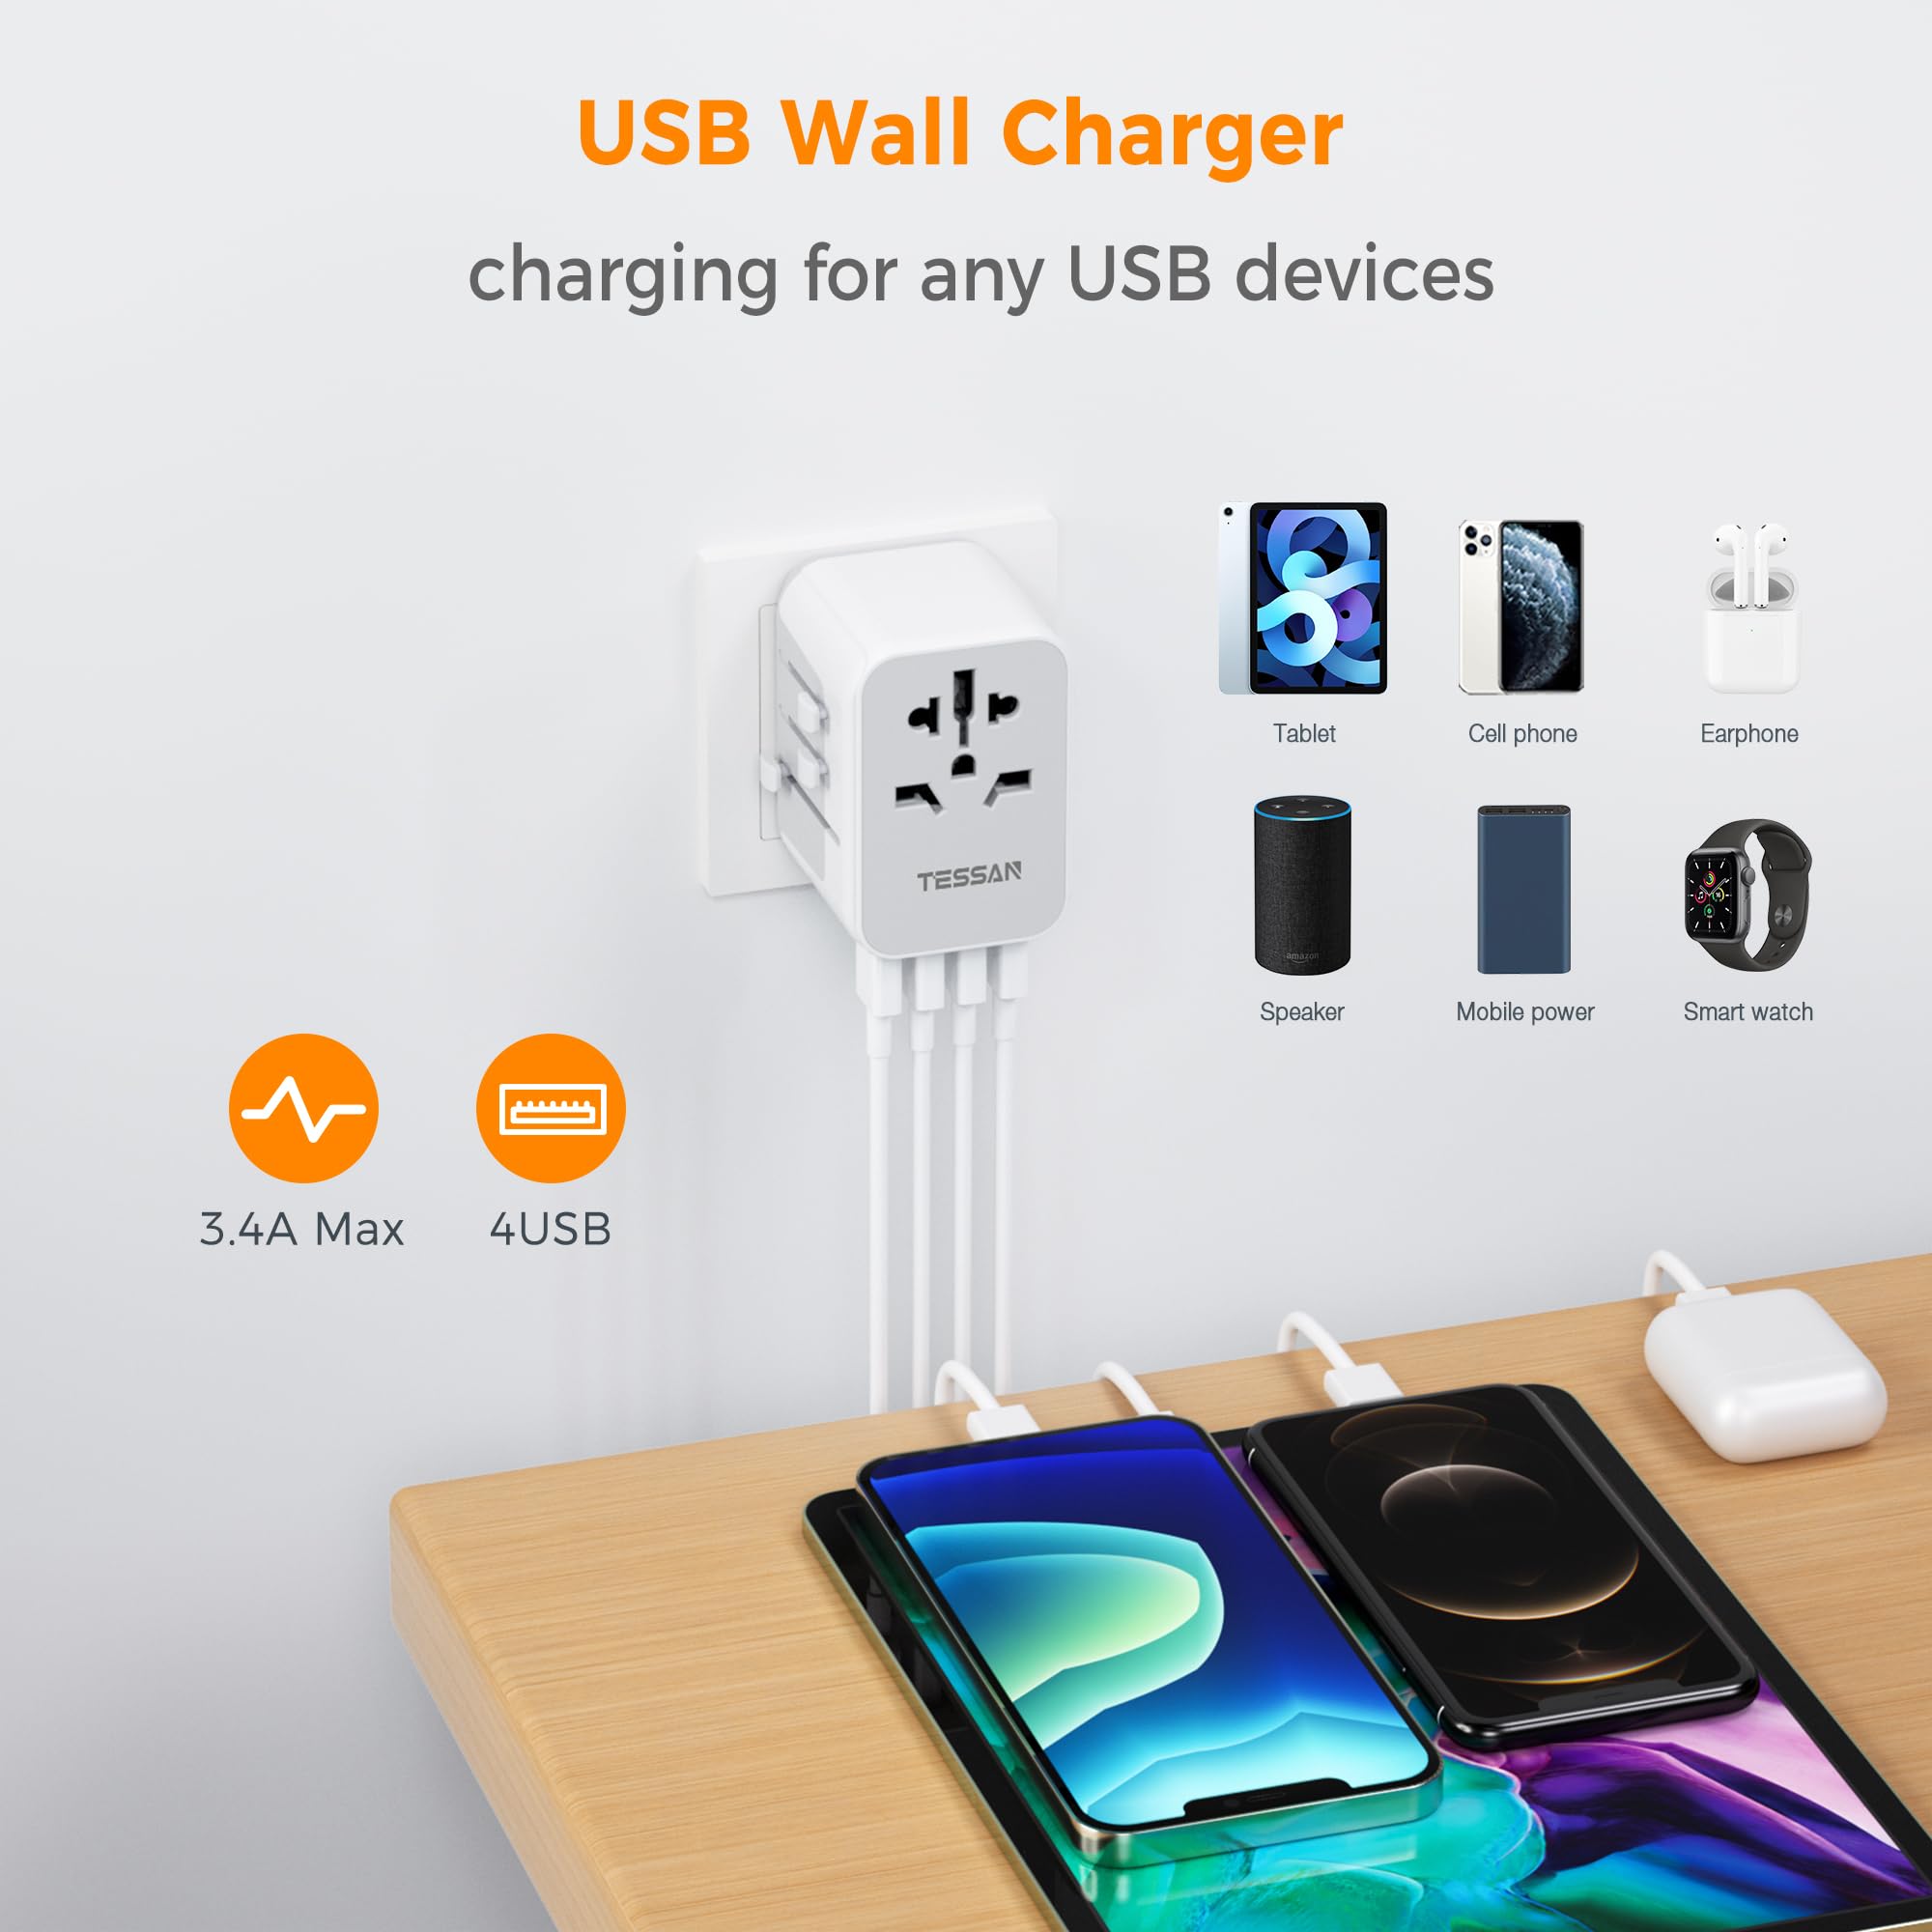 TESSAN Universal Power Adapter, International Plug Adapter with 4 USB Outlets, Travel Worldwide Essentials, All in 1 Wall Charger Converter for UK EU Europe Ireland AU (Type C/G/A/I) Grey